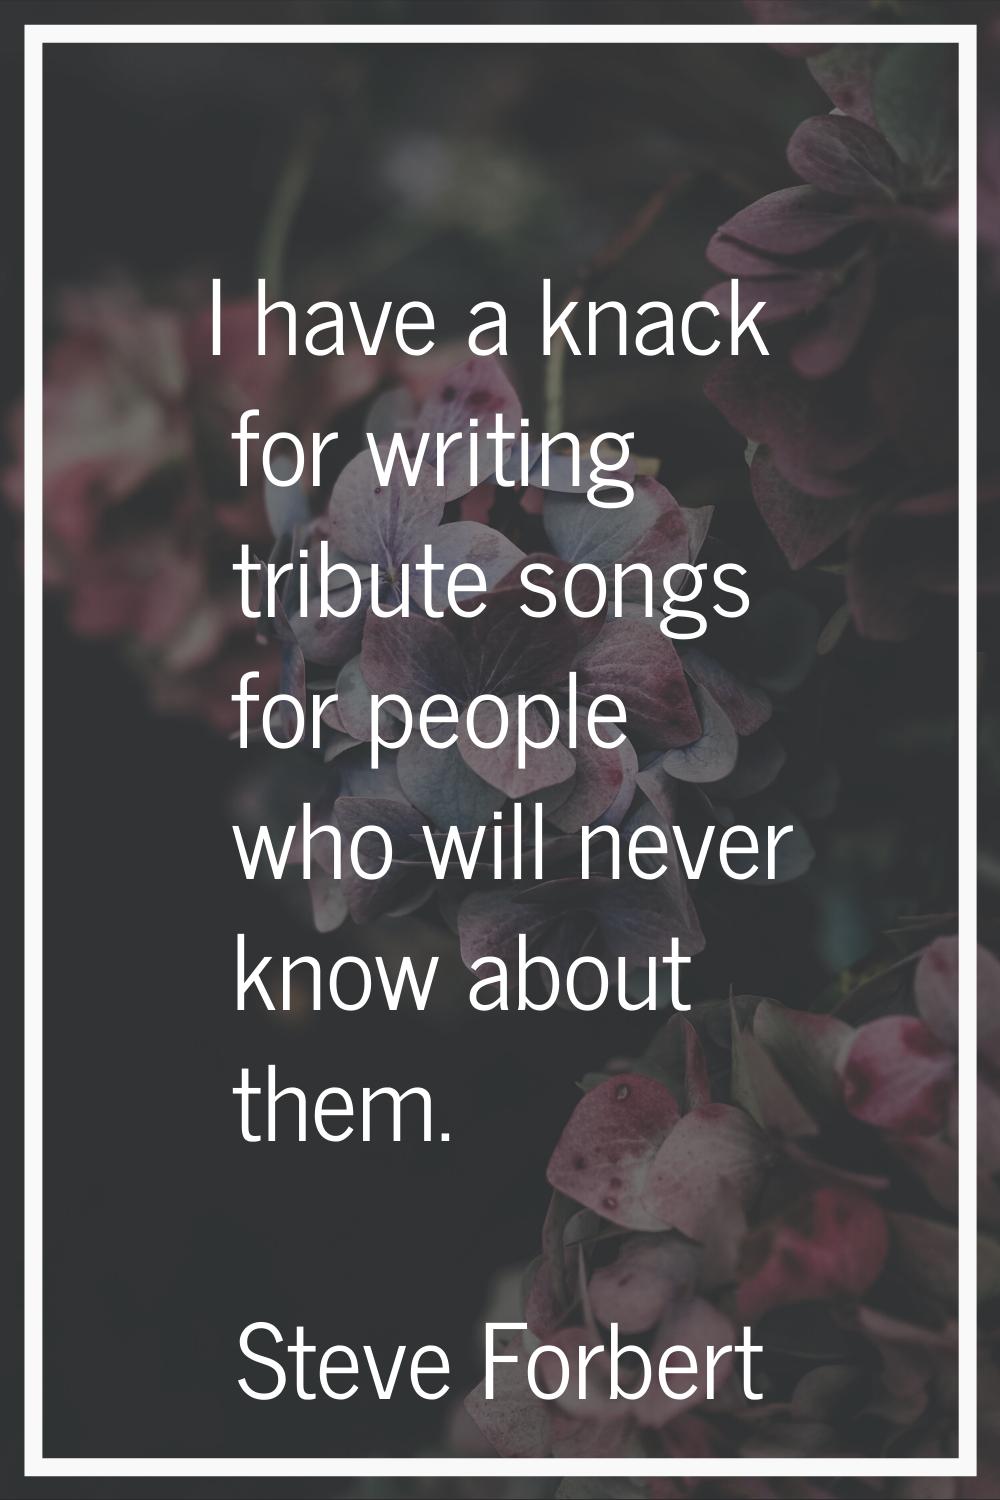 I have a knack for writing tribute songs for people who will never know about them.